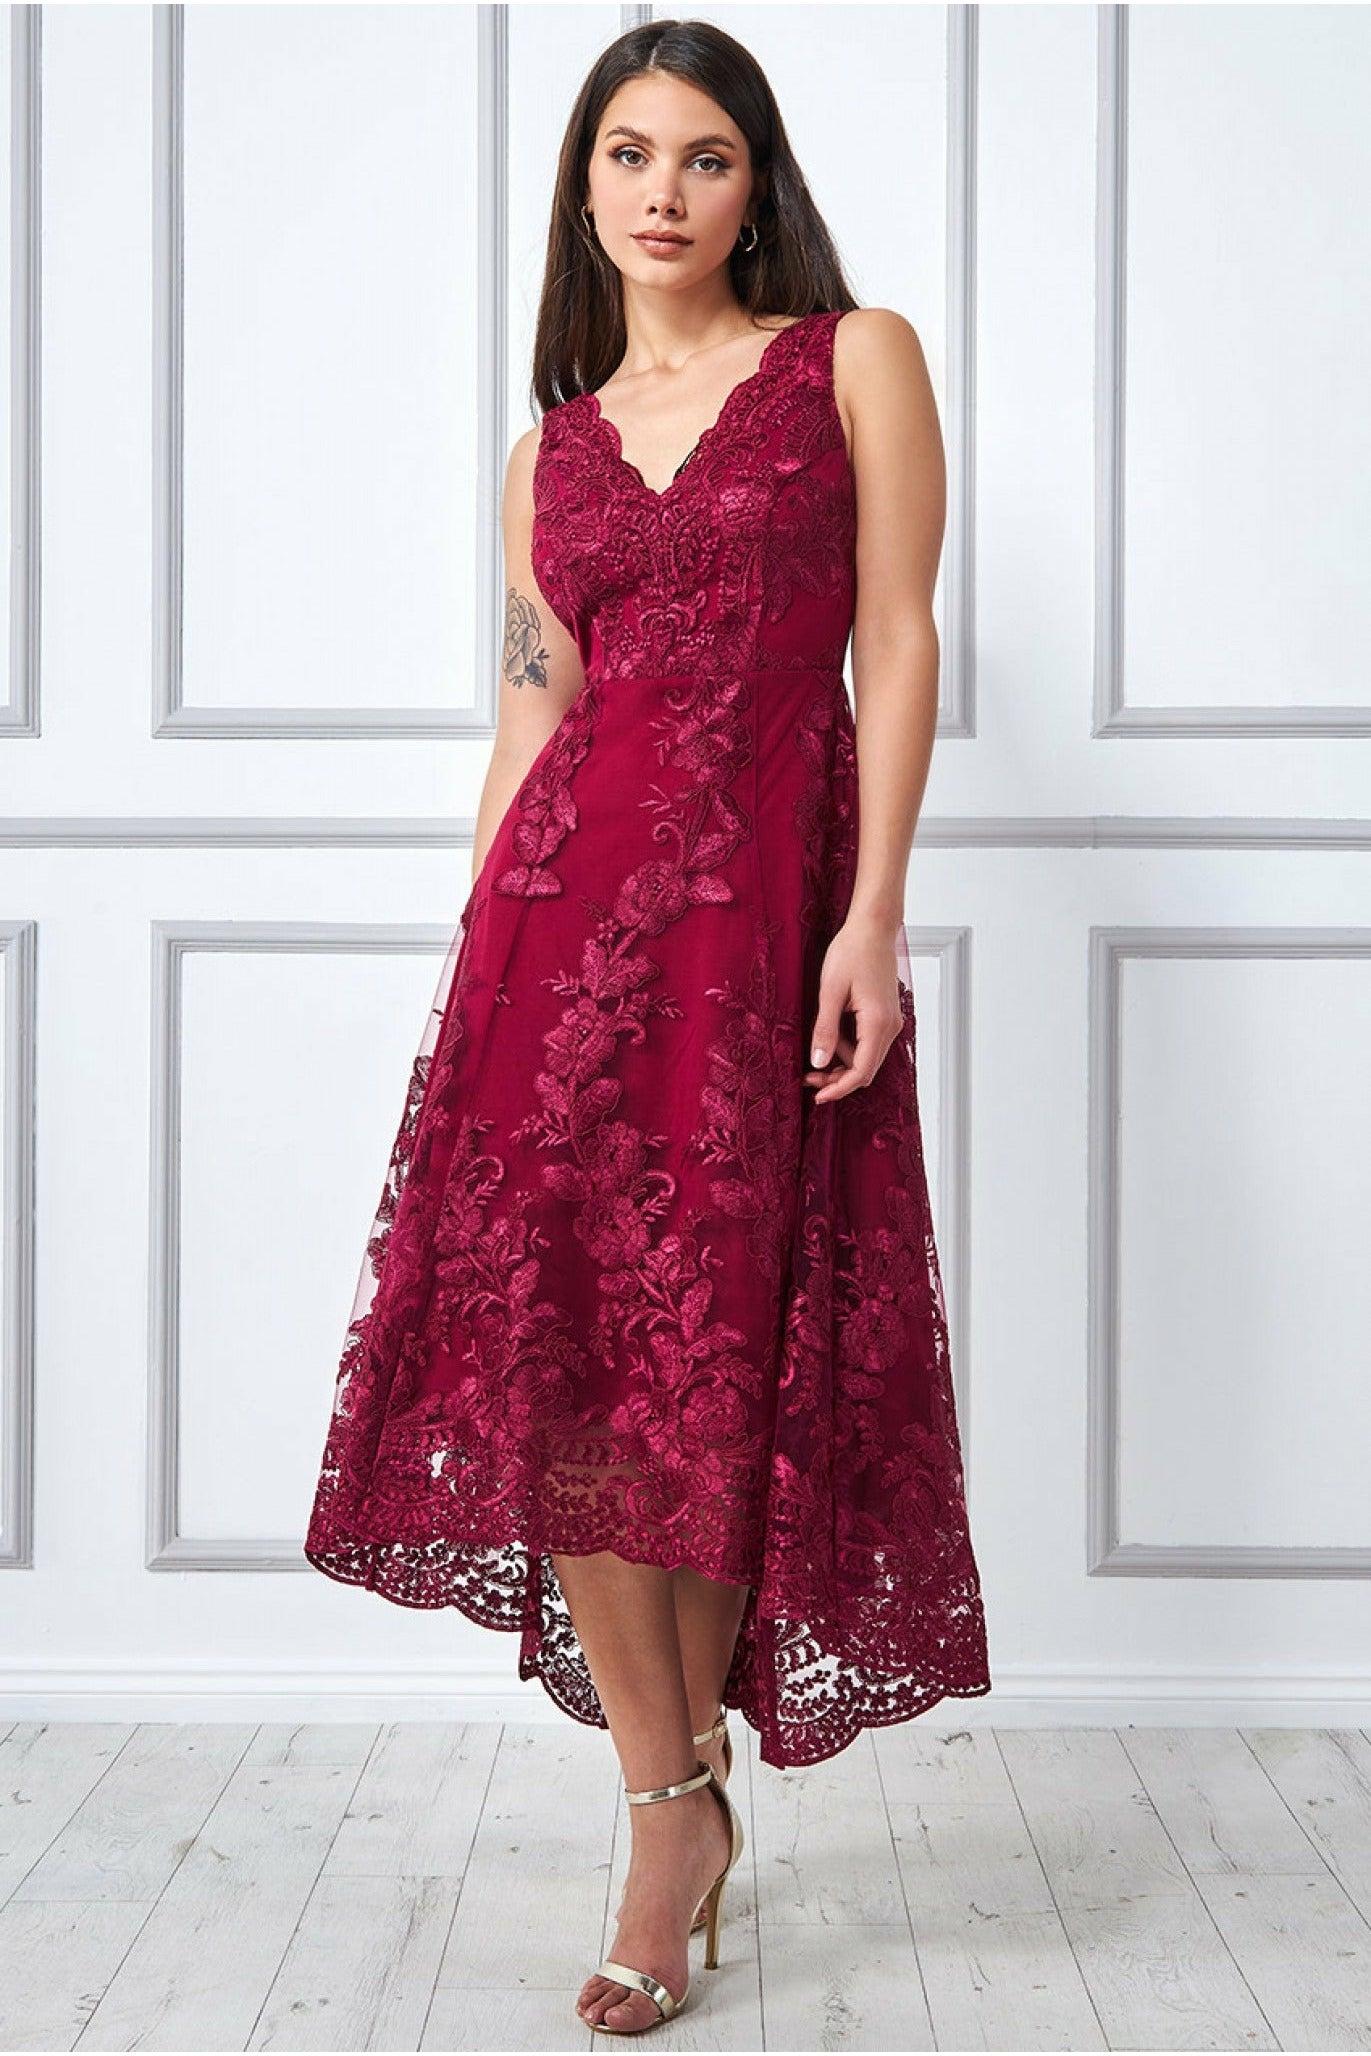 New Goddiva Scalloped Lace Neckline Fitted Midi Cocktail Eve Party Dress 8-16